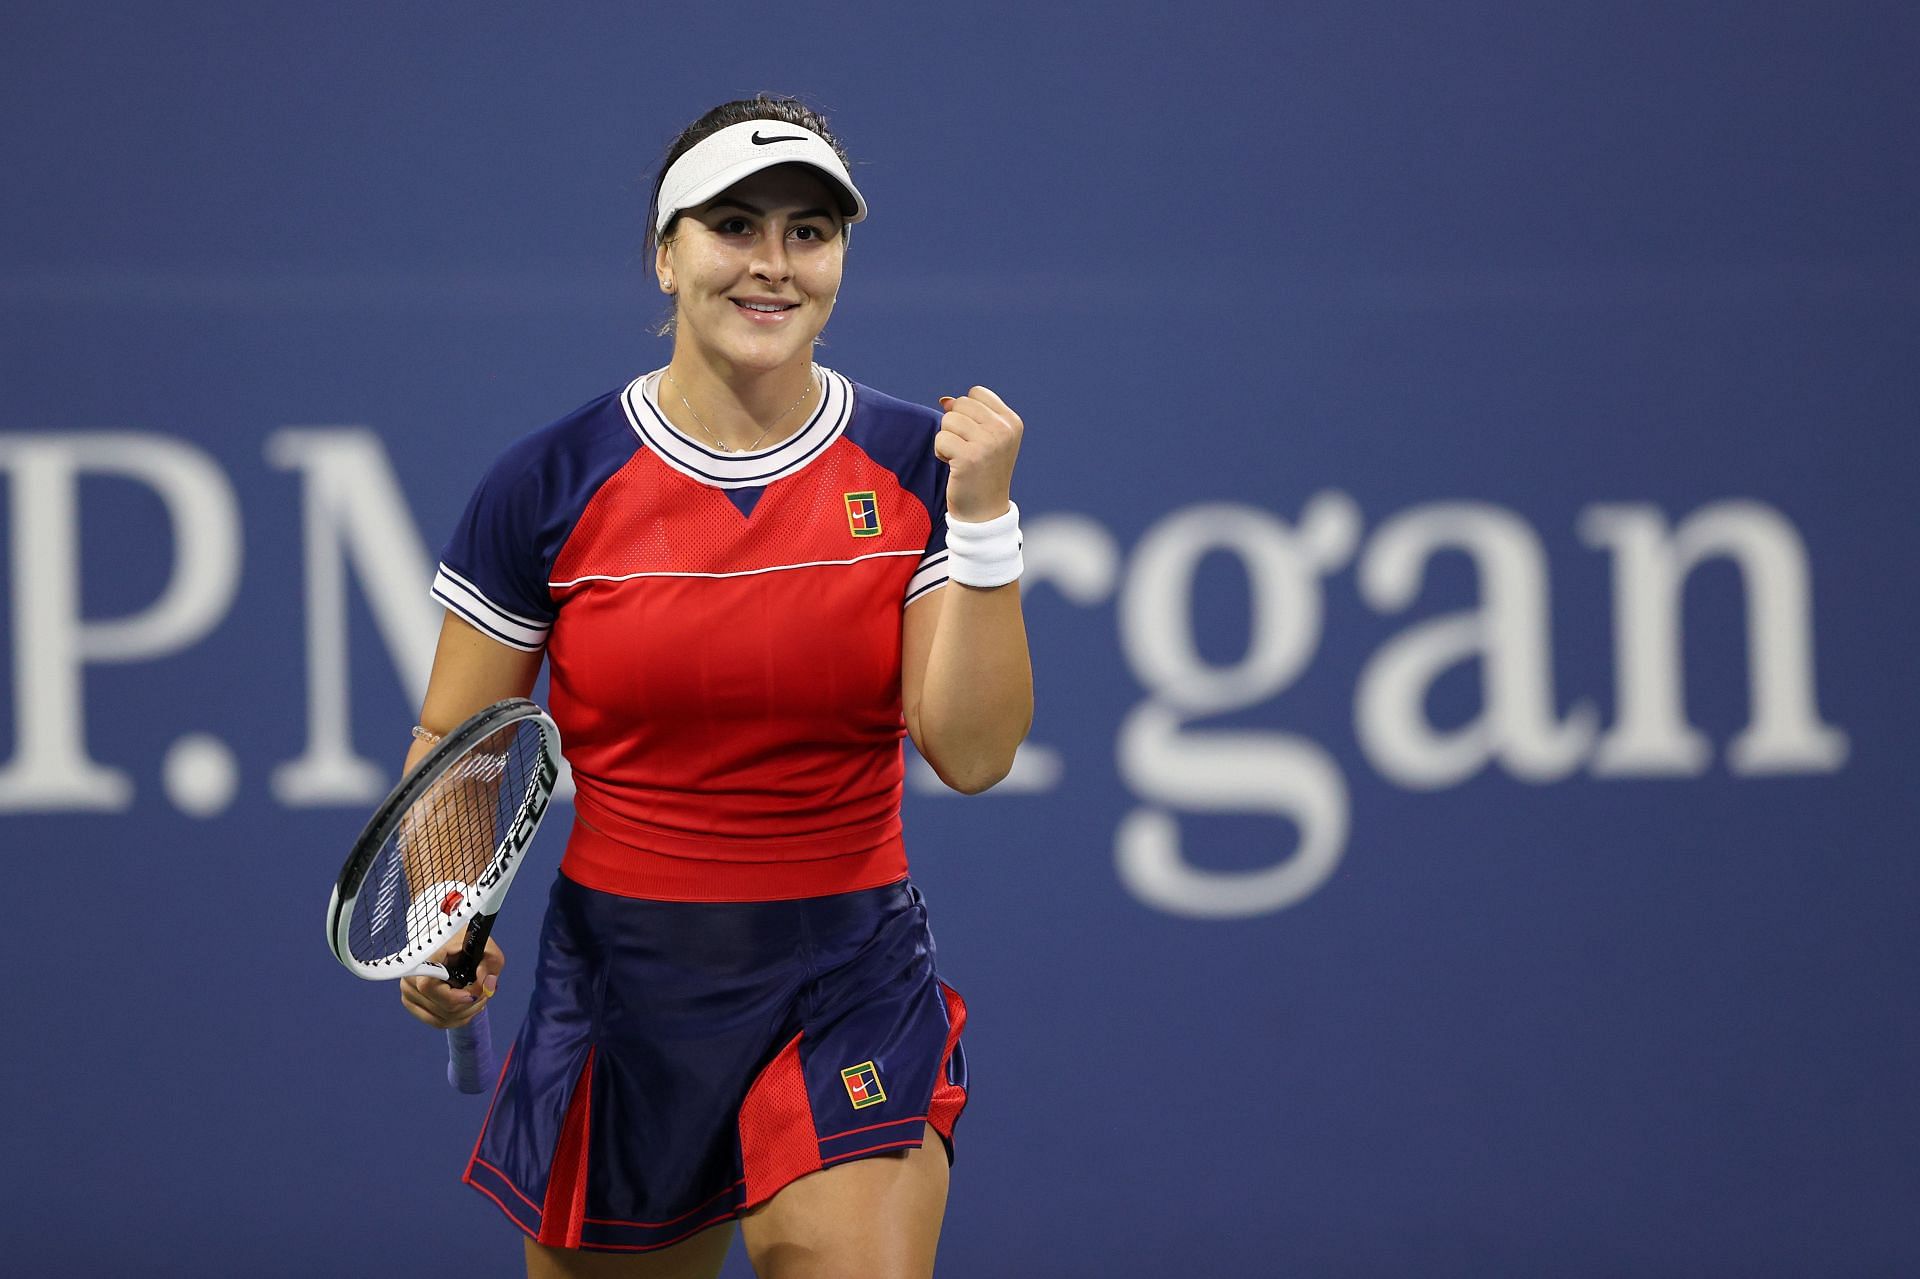 Bianca Andreescu has revealed that she is grateful just getting to play tennis again